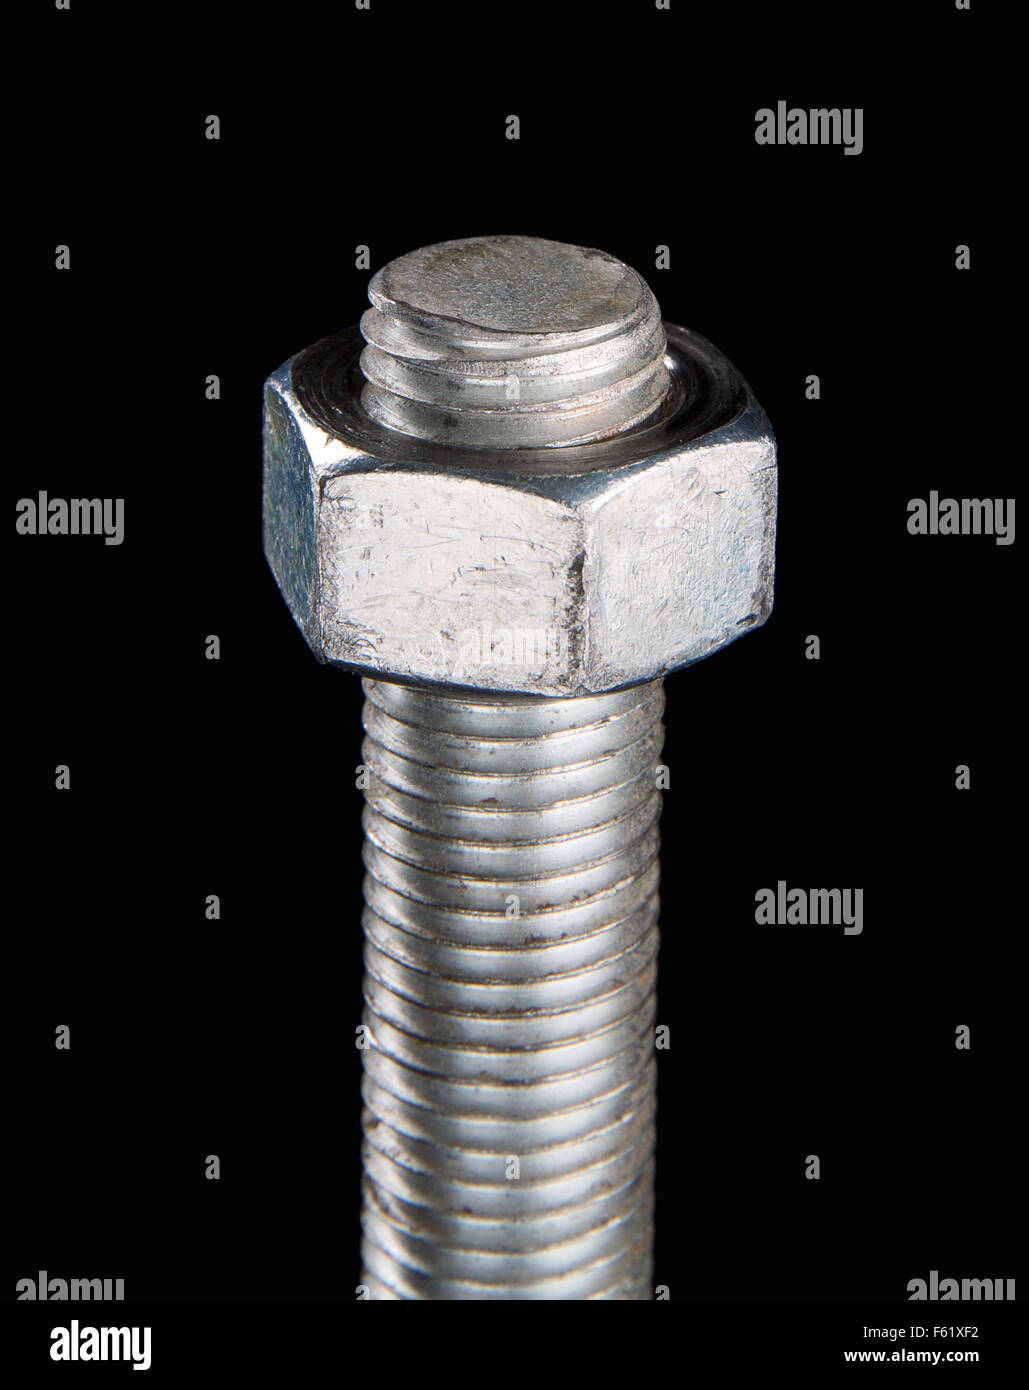 Bolt and nut isolated on black background. Stock Photo